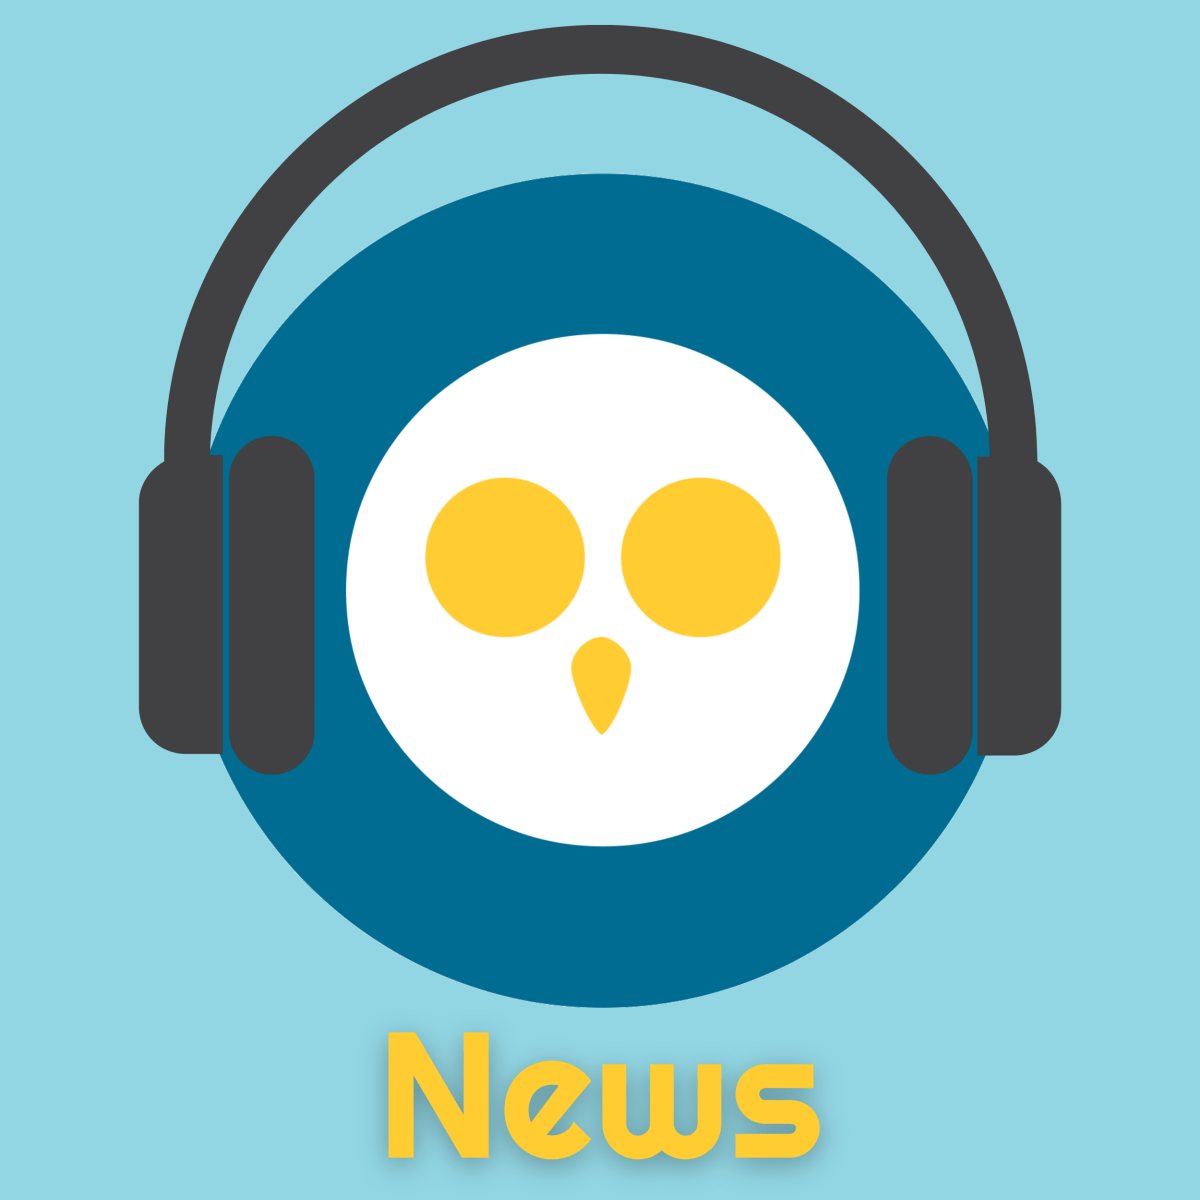 The Owl News Feature Podcast: rental prices, public transport and water safety